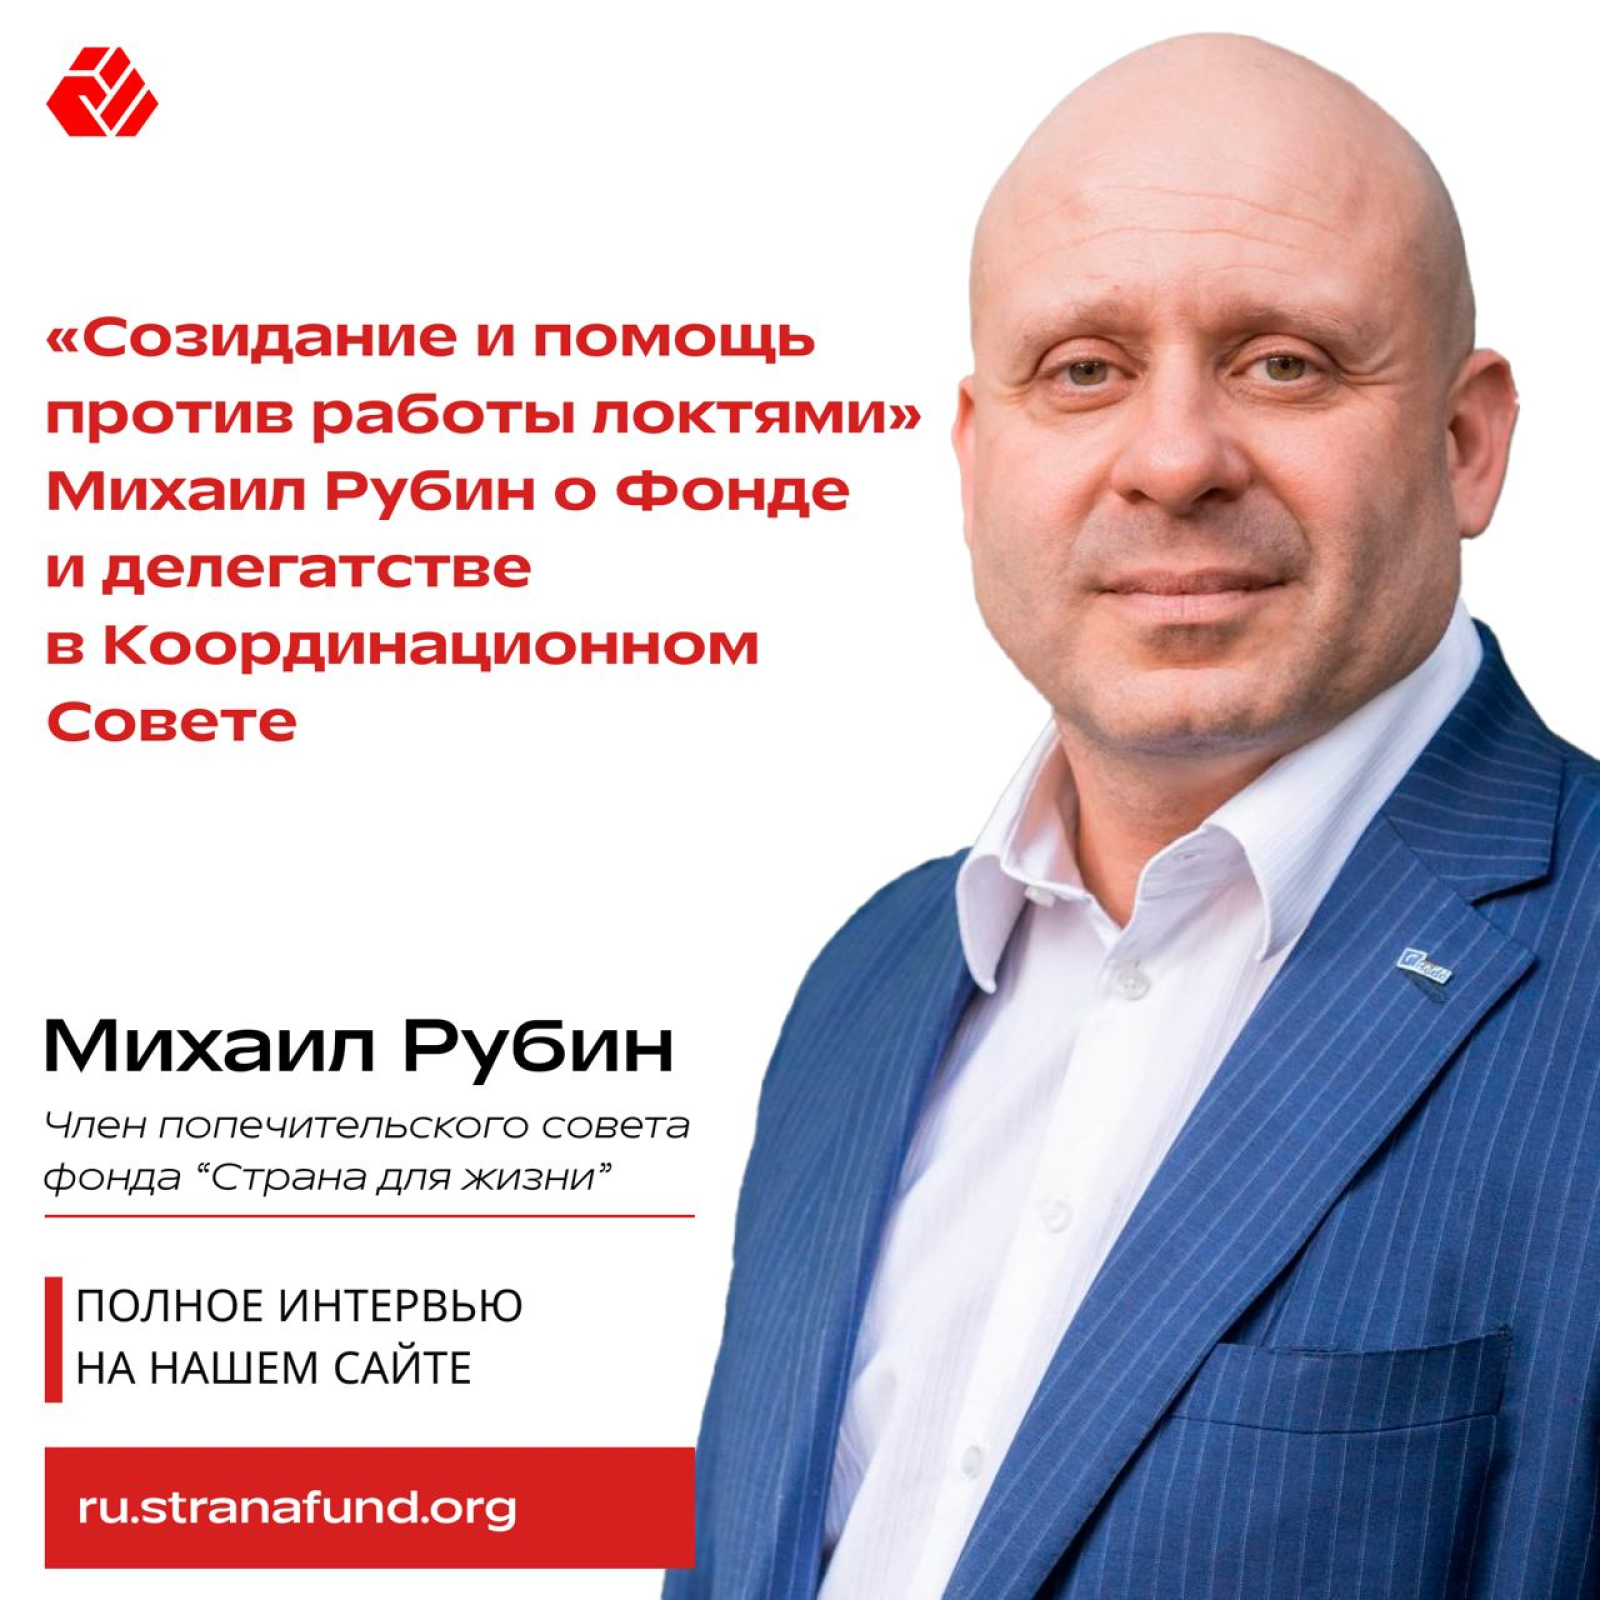 “Creation and assistance versus elbow work.” Mikhail Rubin about the fund and the delegation to the Coordination Council